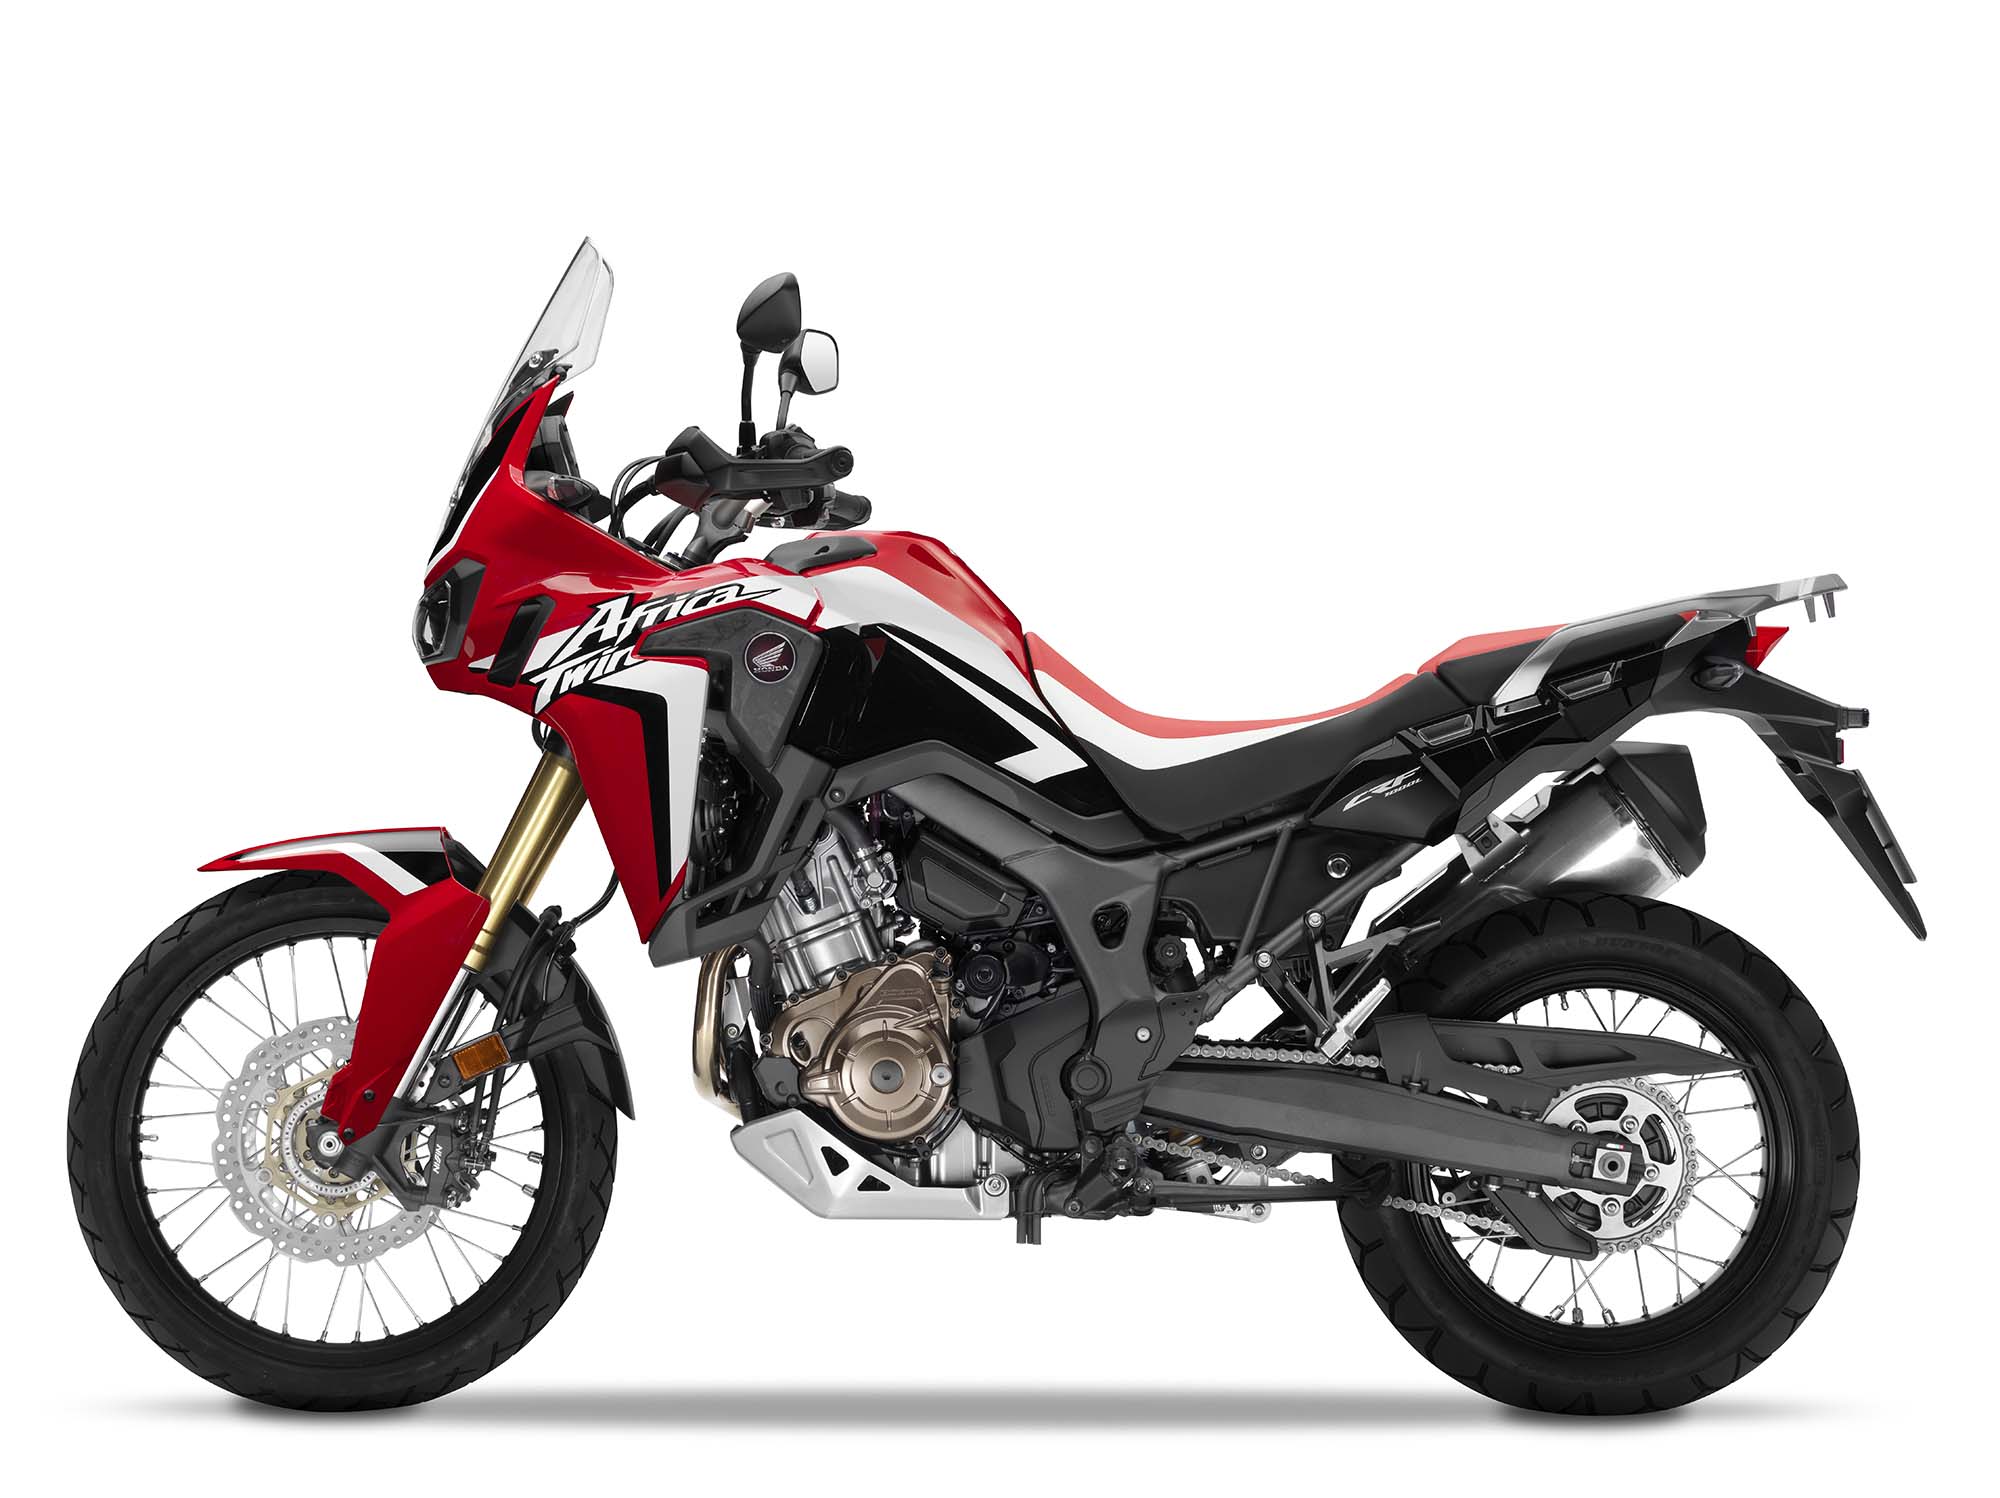 Official Details & Photos of the 2016 Honda Africa Twin